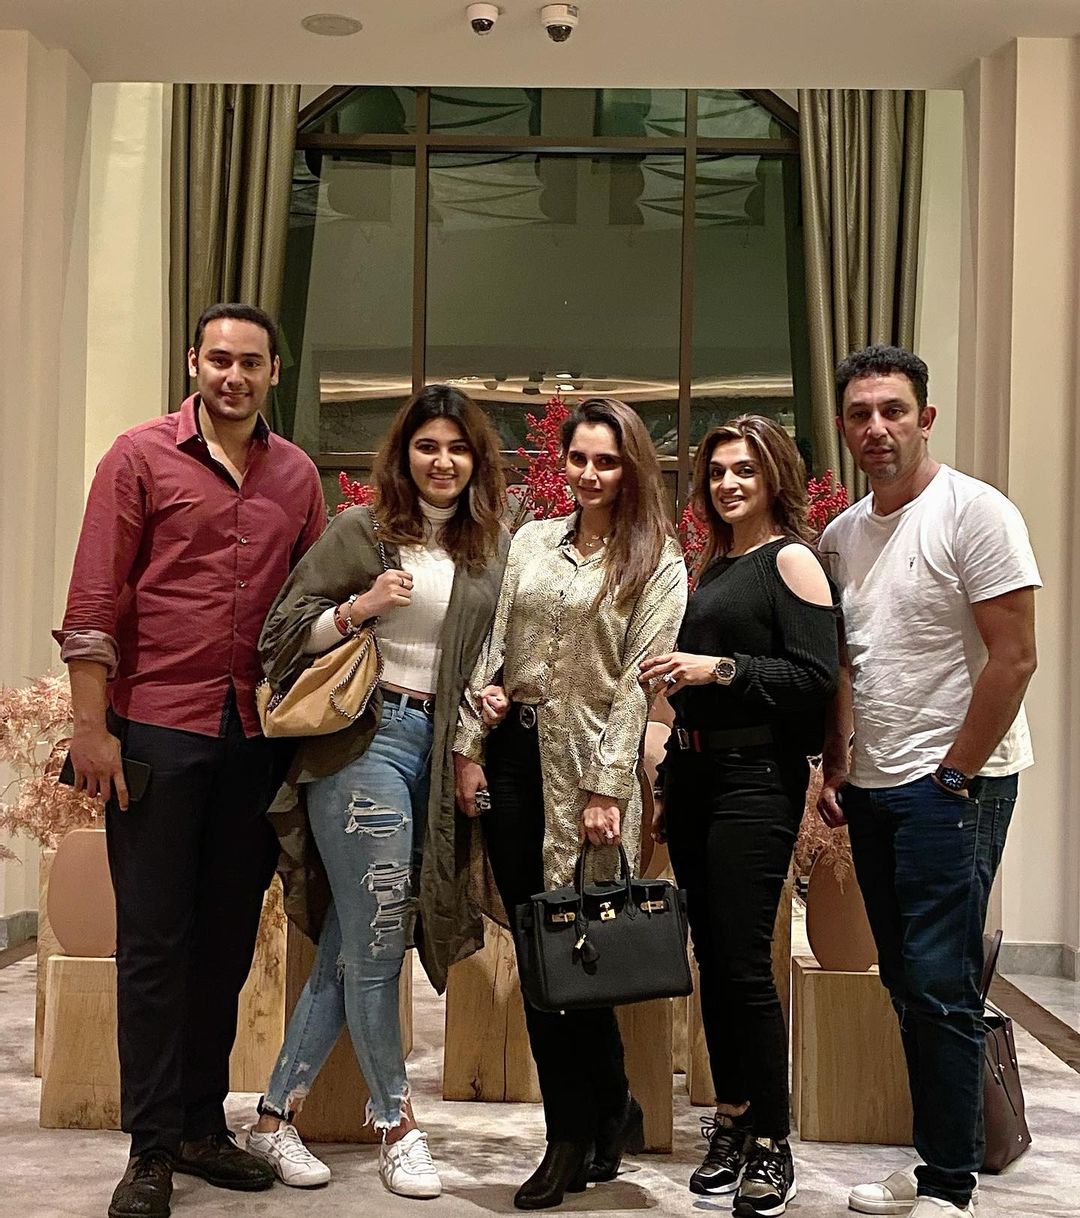 Former Cricketer Azhar Mehmood with his Family - Latest Pictures